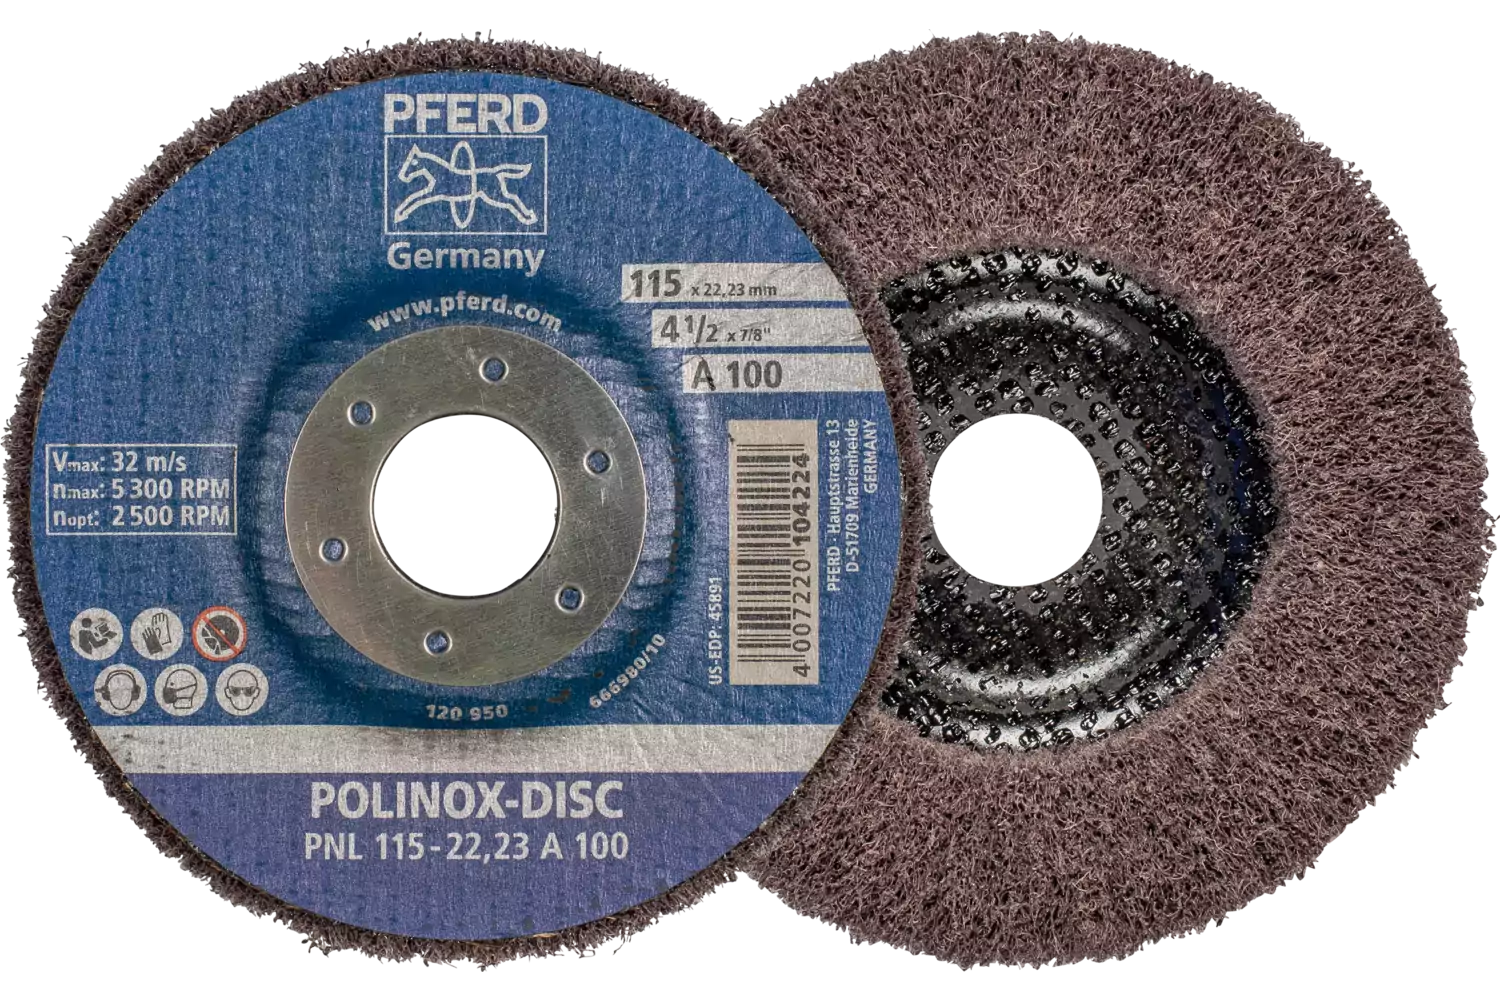 POLINOX non-woven fibre-backing disc PNL dia. 115 mm centre hole dia. 22.23 mm A100 for fine grinding and finishing 1